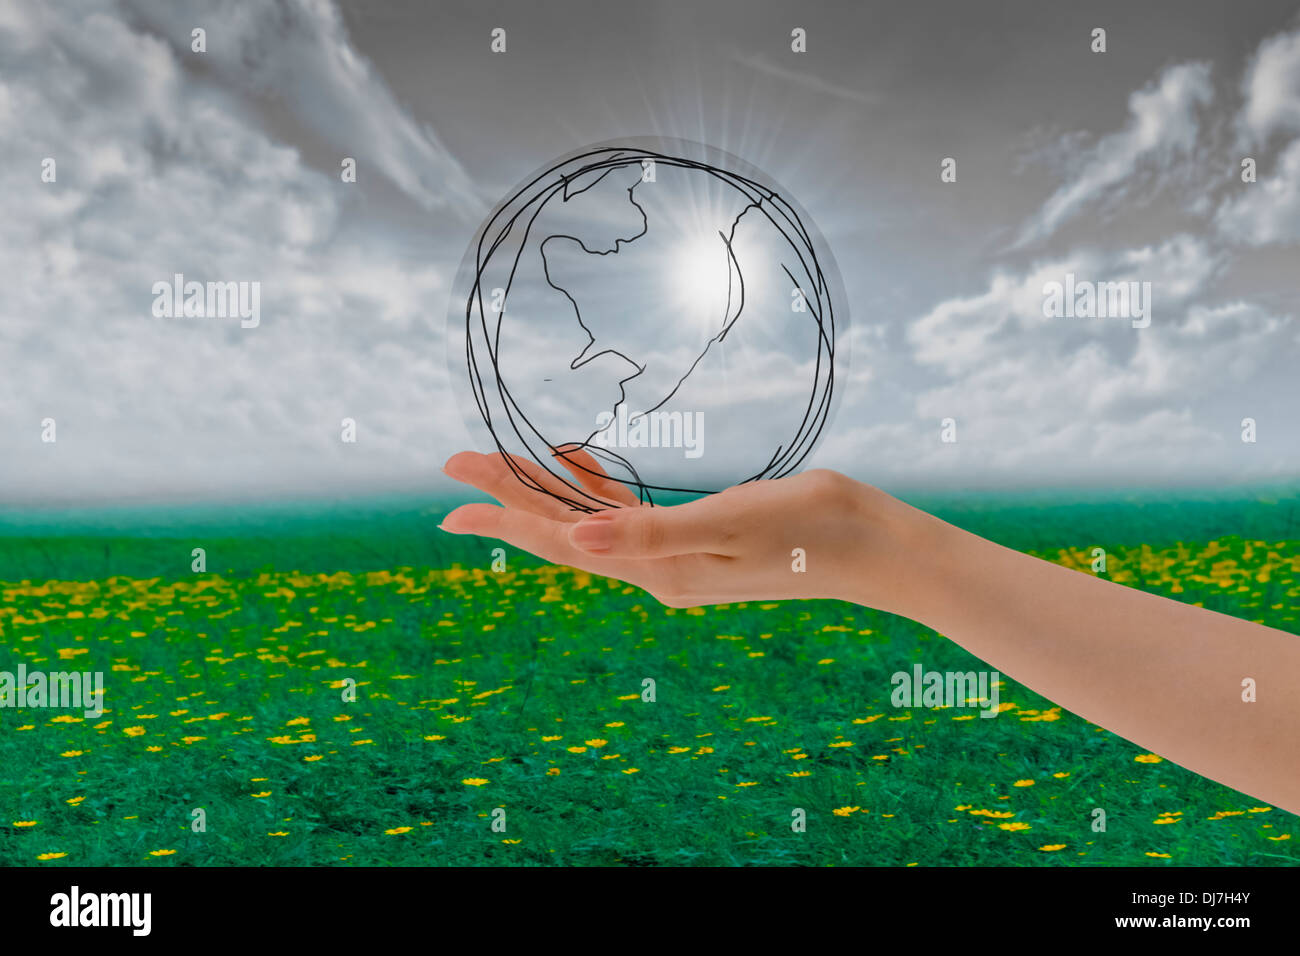 Hand Holding Bubble with Save Earth, Environment Concept Stock Photo